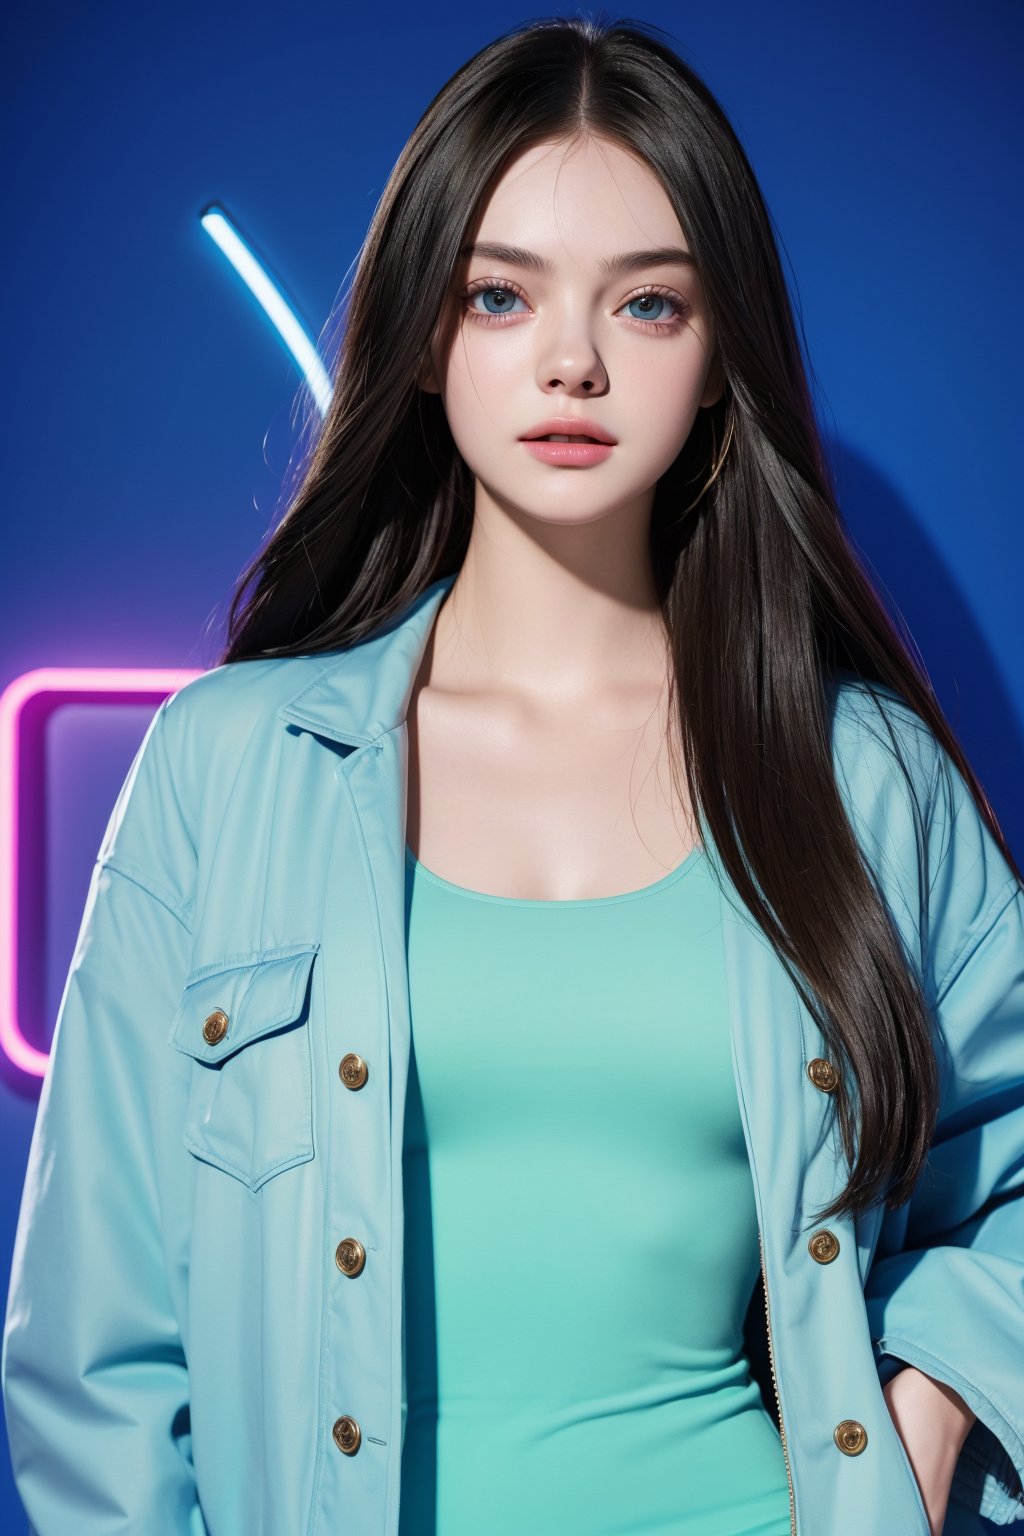 score_9, (Masterpiece), REALISTIC, UHD, vivid colors, color enhanced filter, 8K, more detail, high contrast, ultra high_resolution, sharp, (advertisement shot), 1girl, ((She looks like Elle fanning, eyes look like Mila kunis, light smile)), 20yo, ((straight hair)), symmetrical eyes, detail face feature, well-proportioned body, detailed fabric textures in clothing, she is a super model, (magazine photo, ZARA brand summer fashion collections dress and jacket and accessories), (CG neon light background), (lettering on the wall like "HIKER")